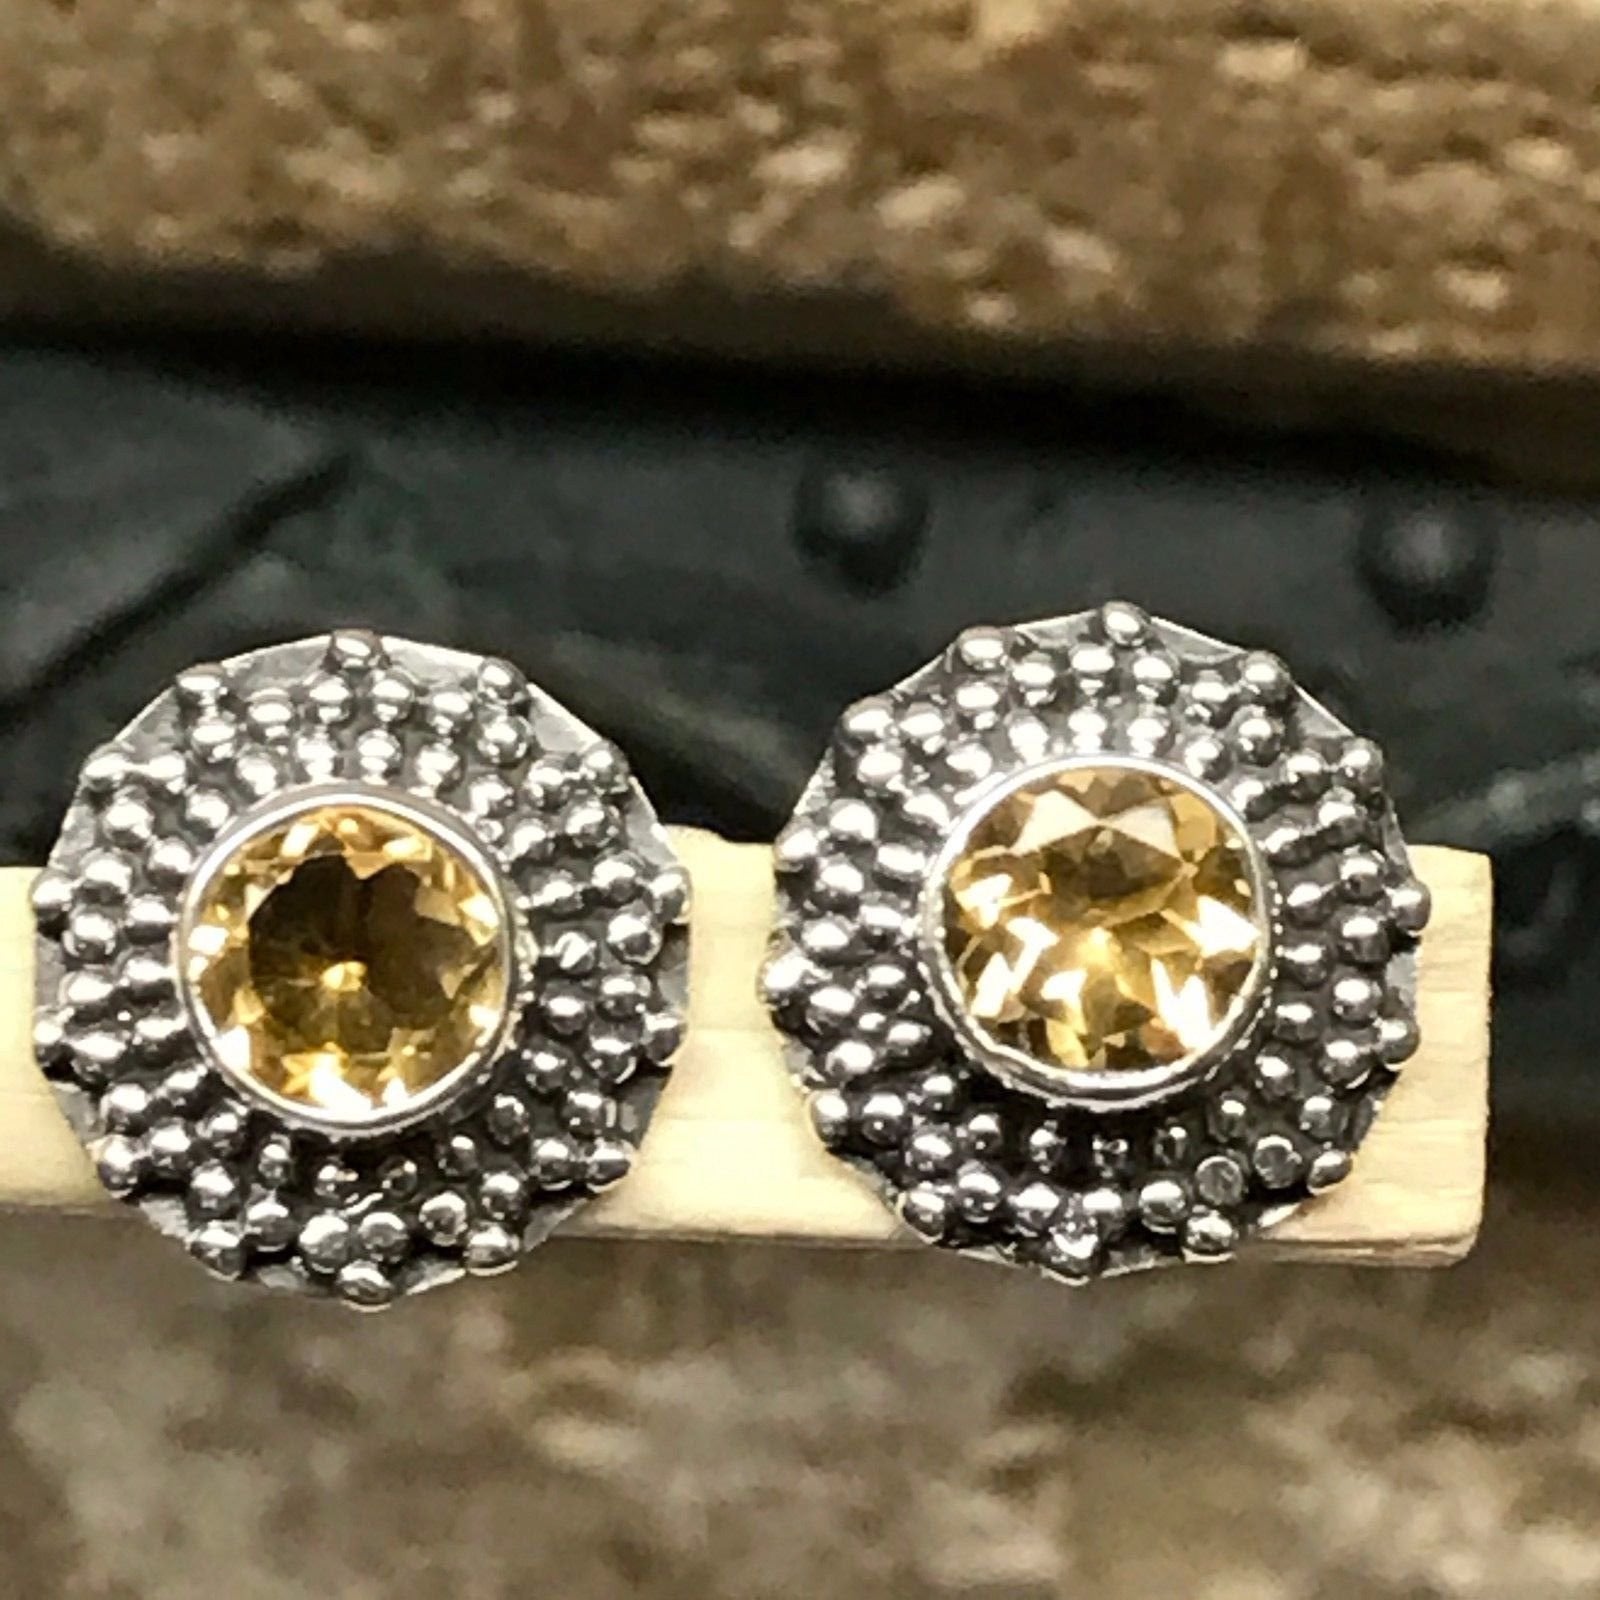 Natural 1ct Golden Citrine 925 Solid Sterling Silver Stud Earrings 12mm - Natural Rocks by Kala